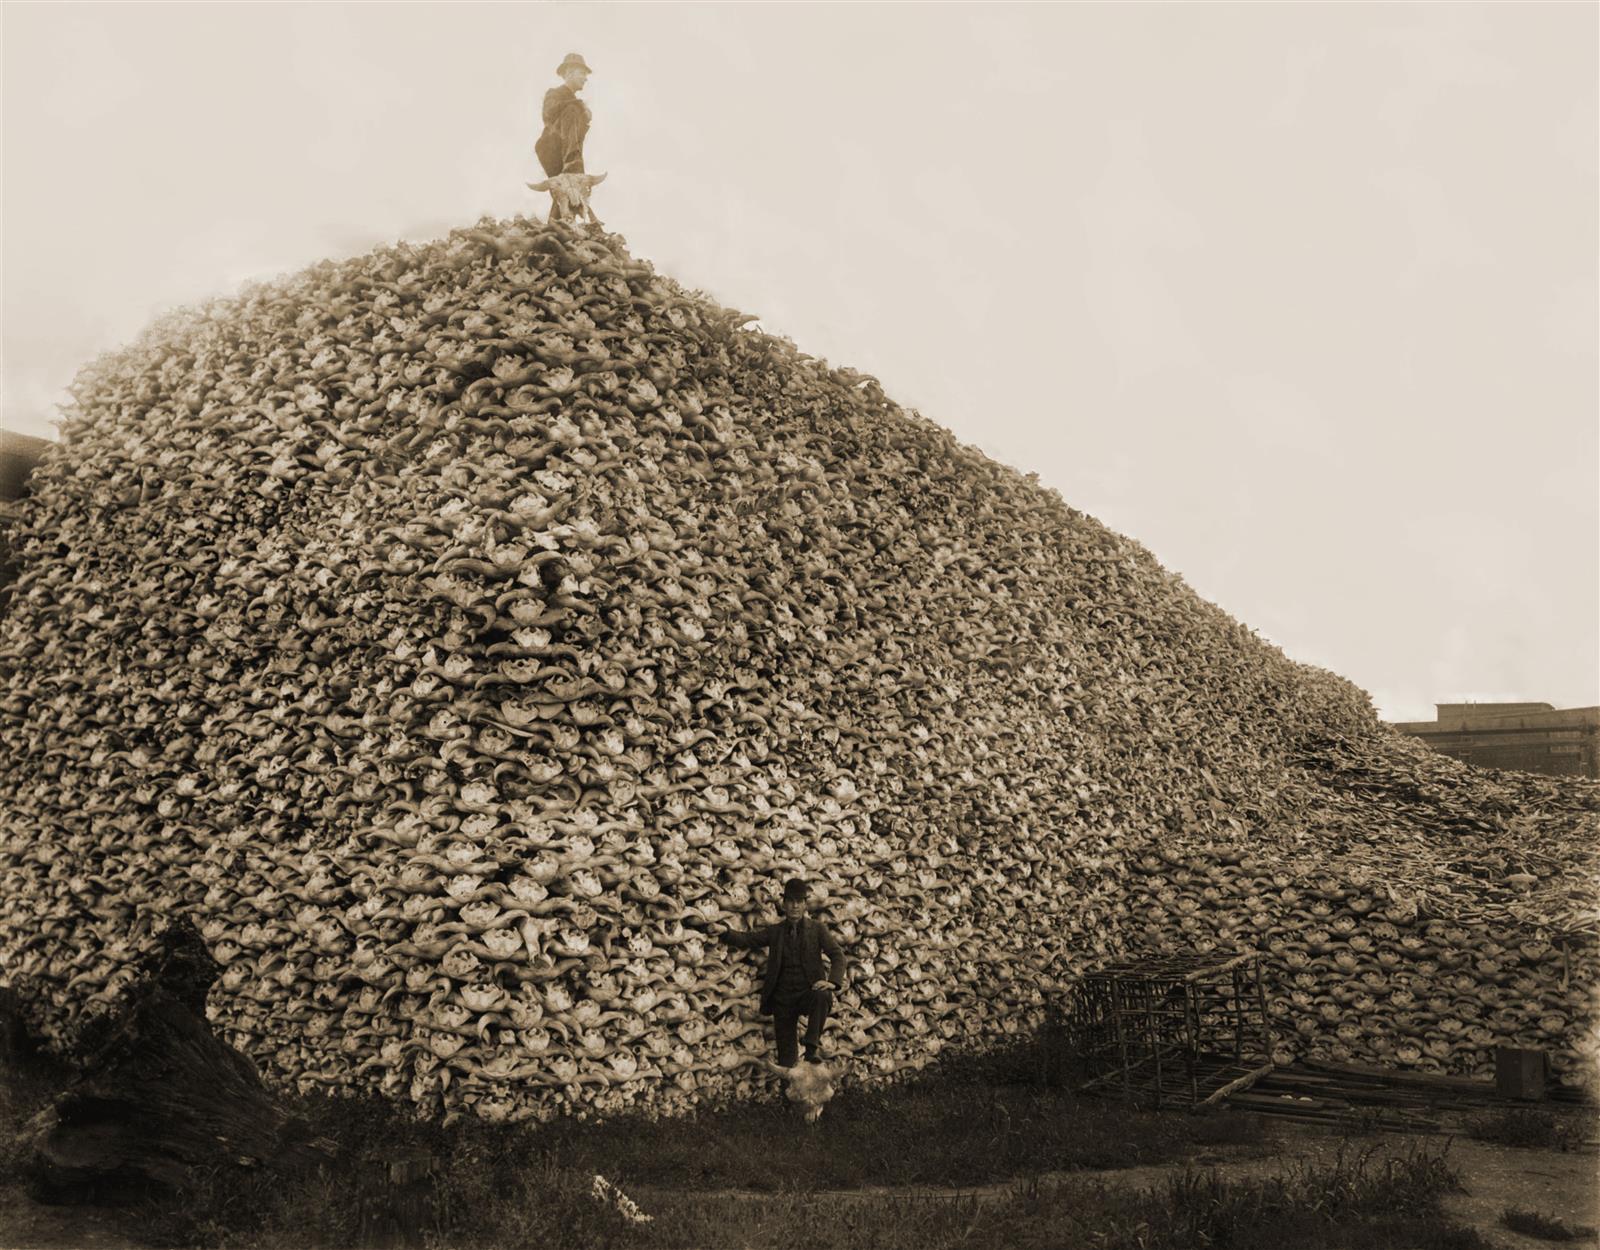 This is a picture from the 1870s showing a man standing in front of a bison skull pile; apparently the government endorsed the slaughter to starve the Native American tribes who depended on the for food